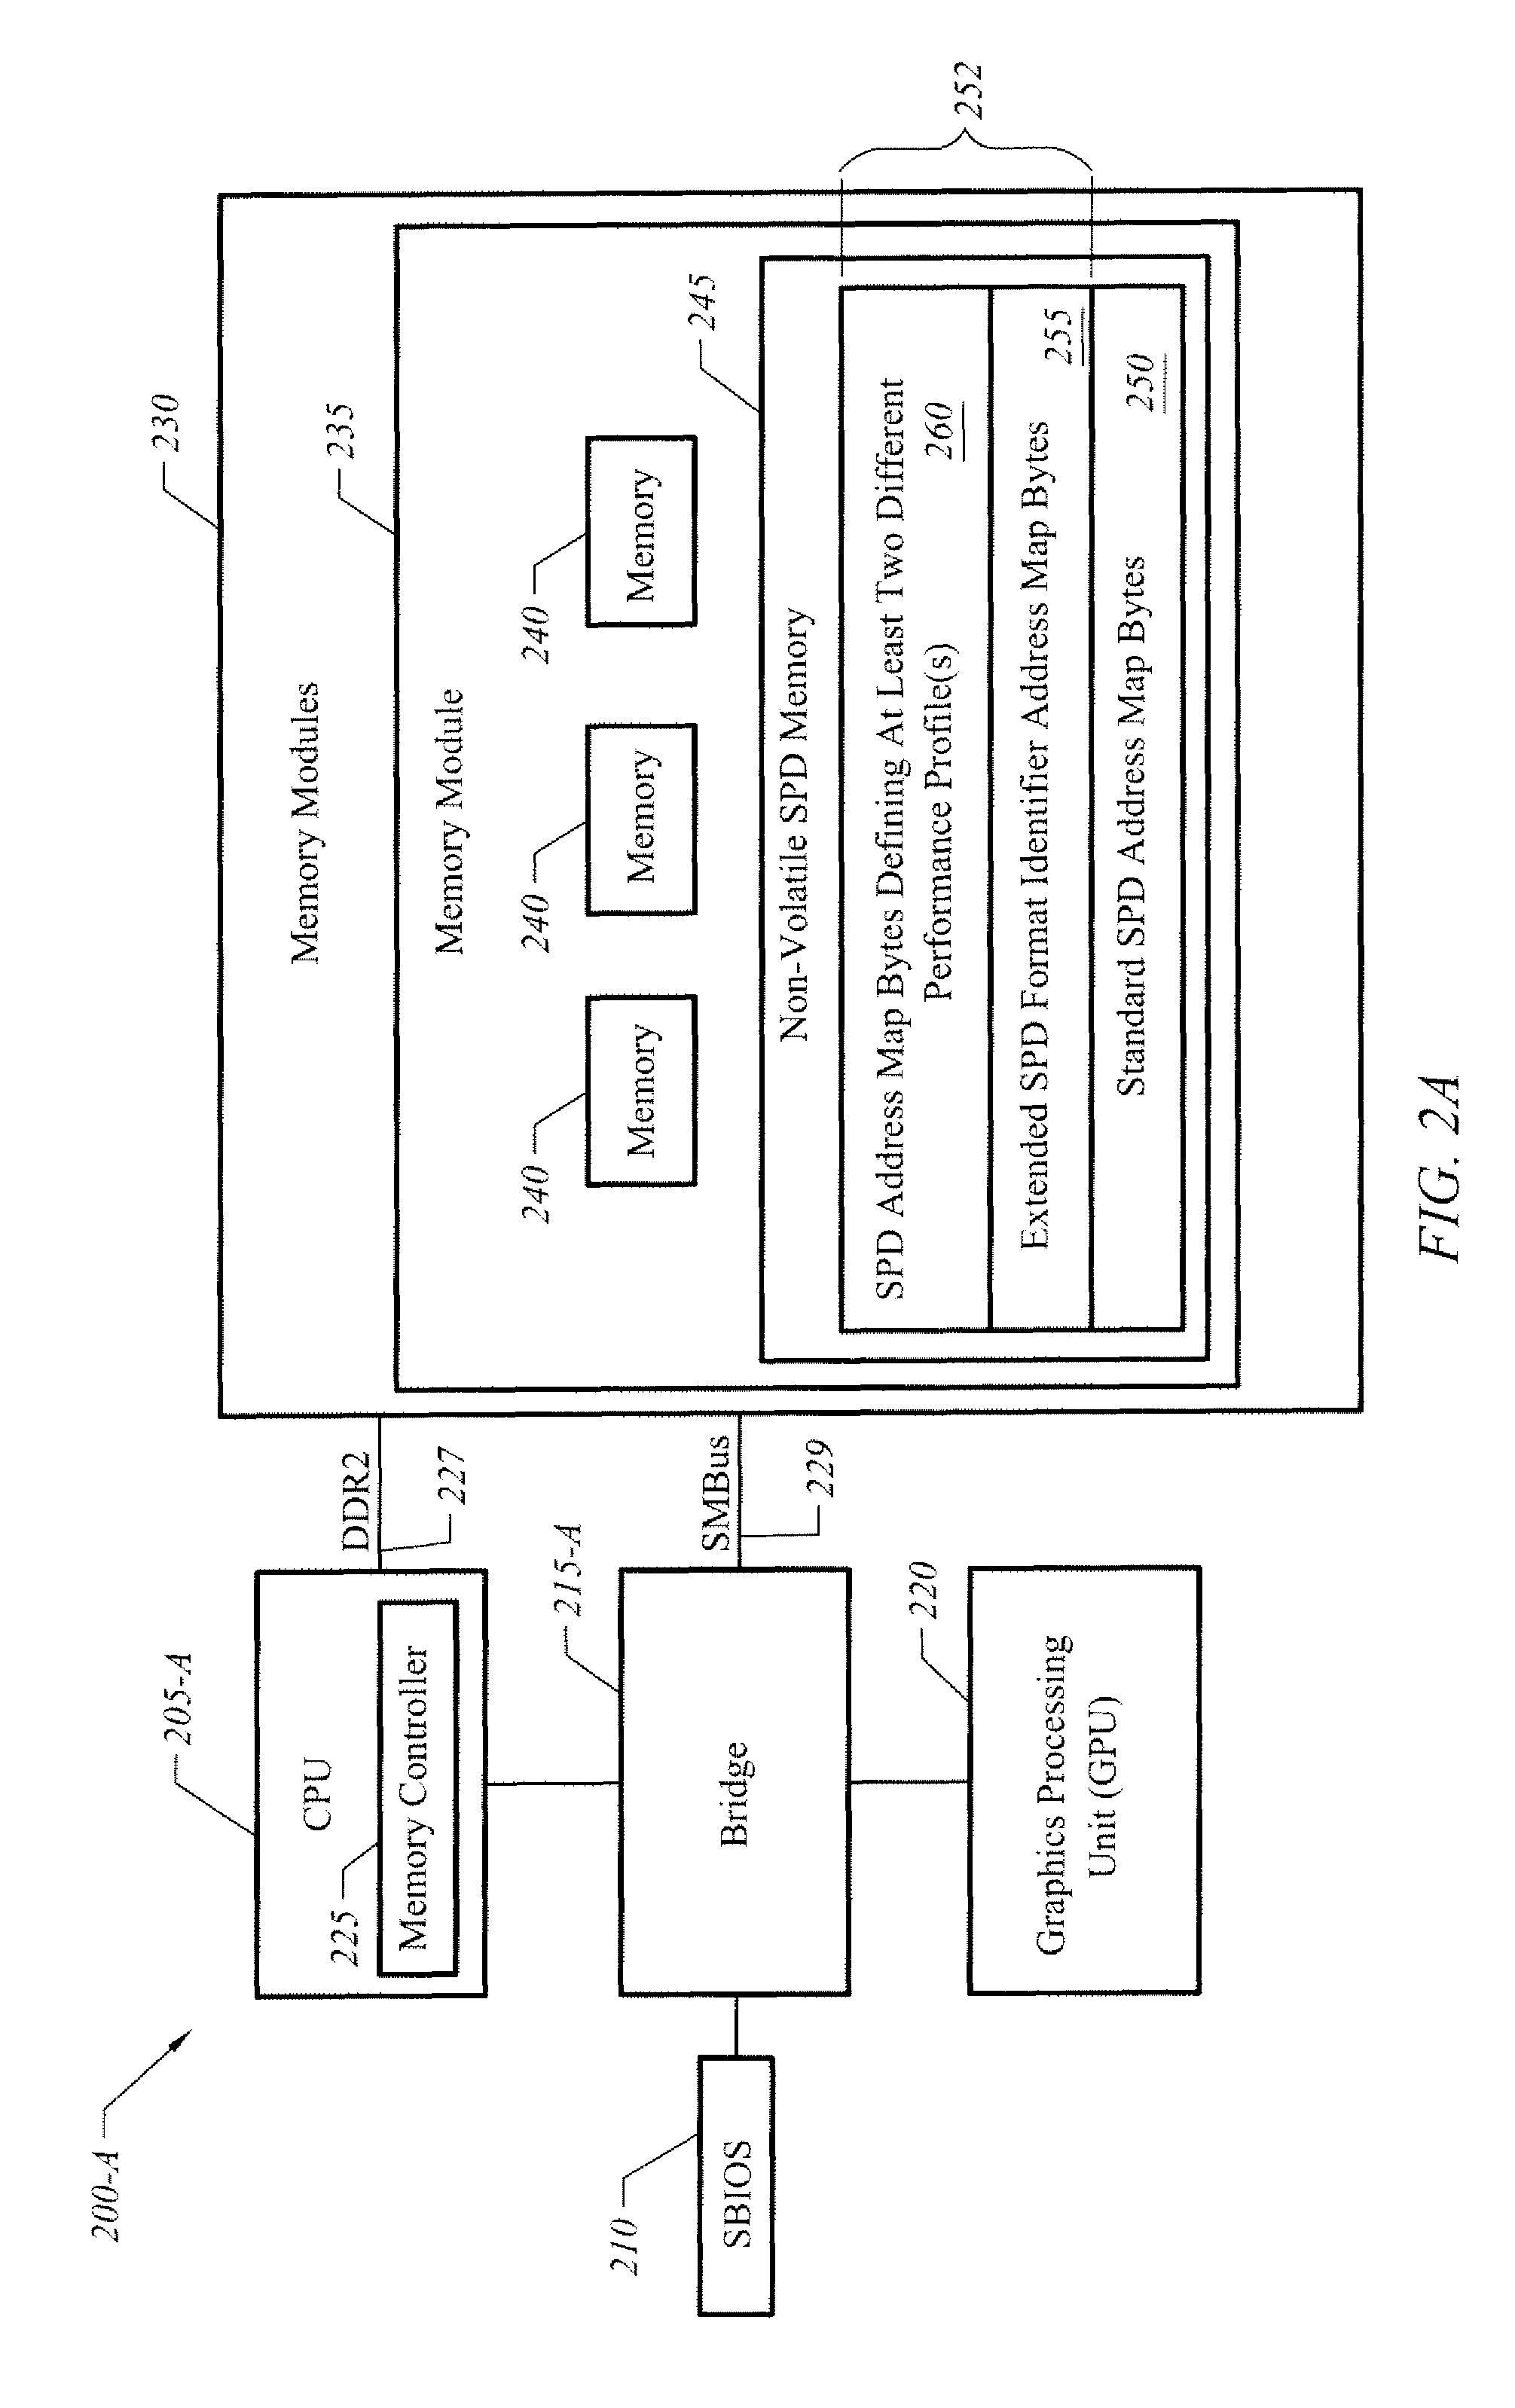 Apparatus, system, and method for extended serial presence detect for memory performance optimization